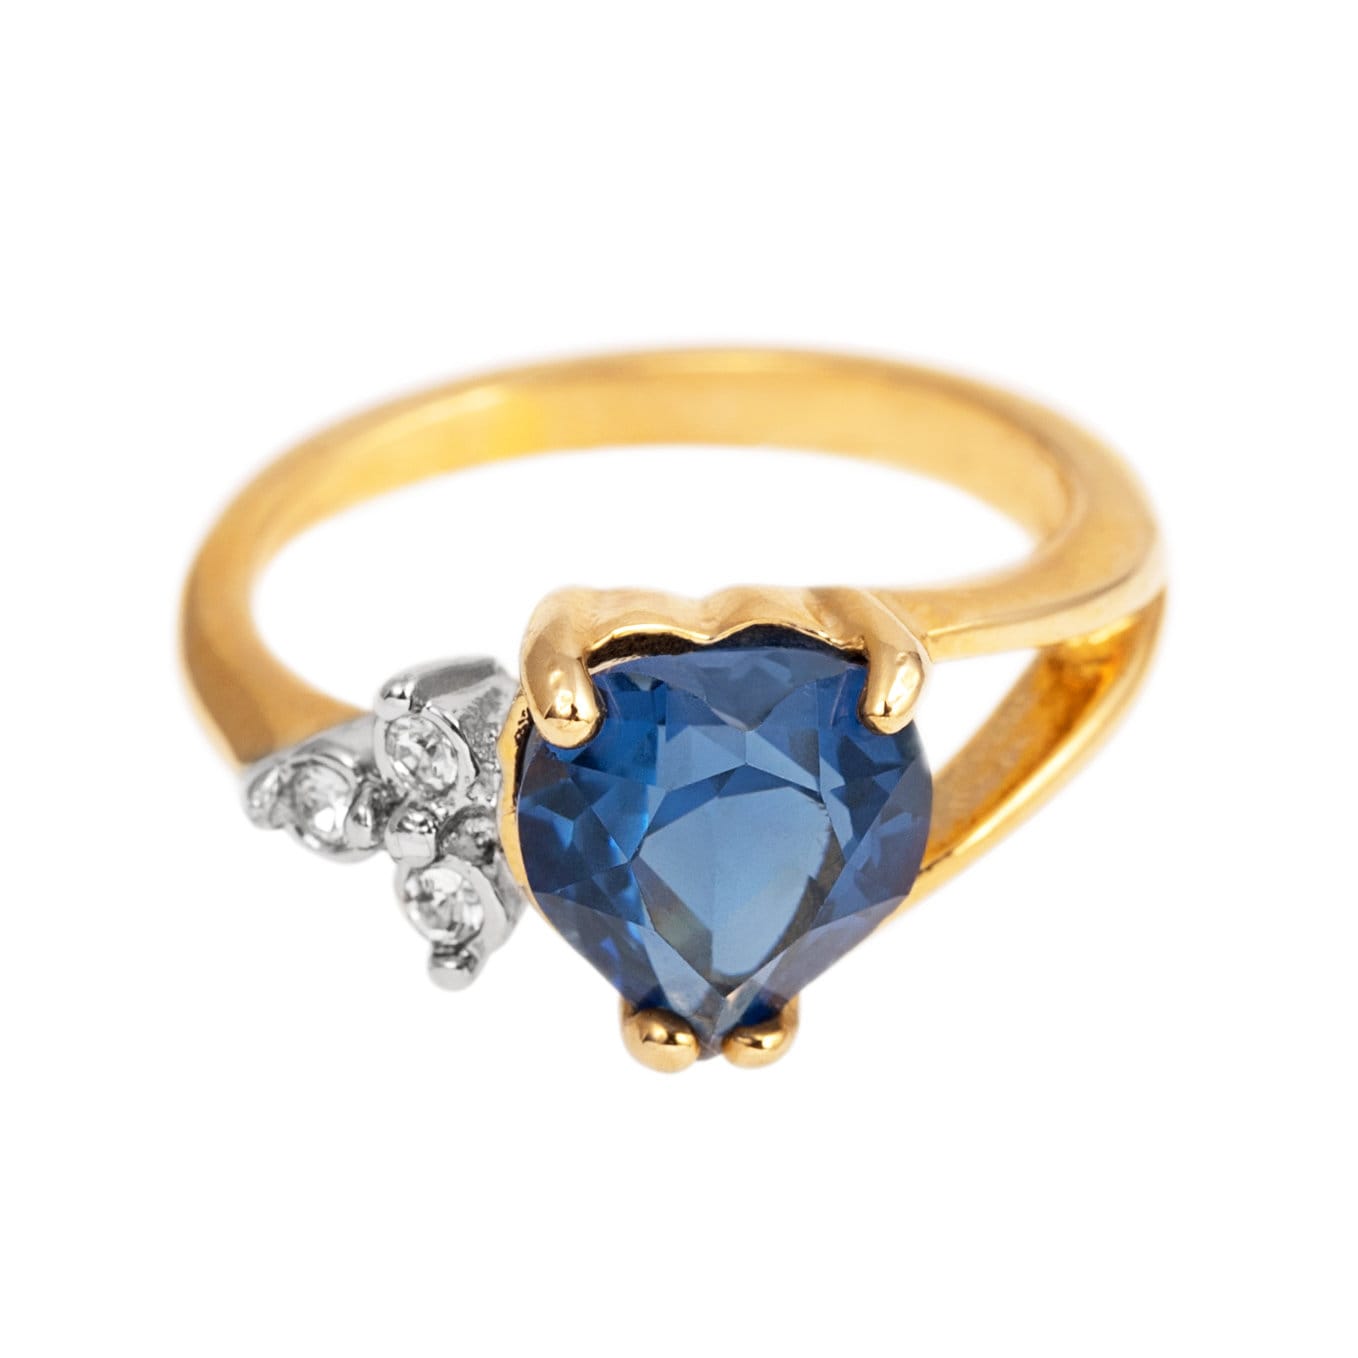 Vintage Ring Sapphire Cubic Zirconia and Clear Swarovski Crystals 18kt Gold Antique Womans Jewelry Heart Promise Rings #R1936-SY